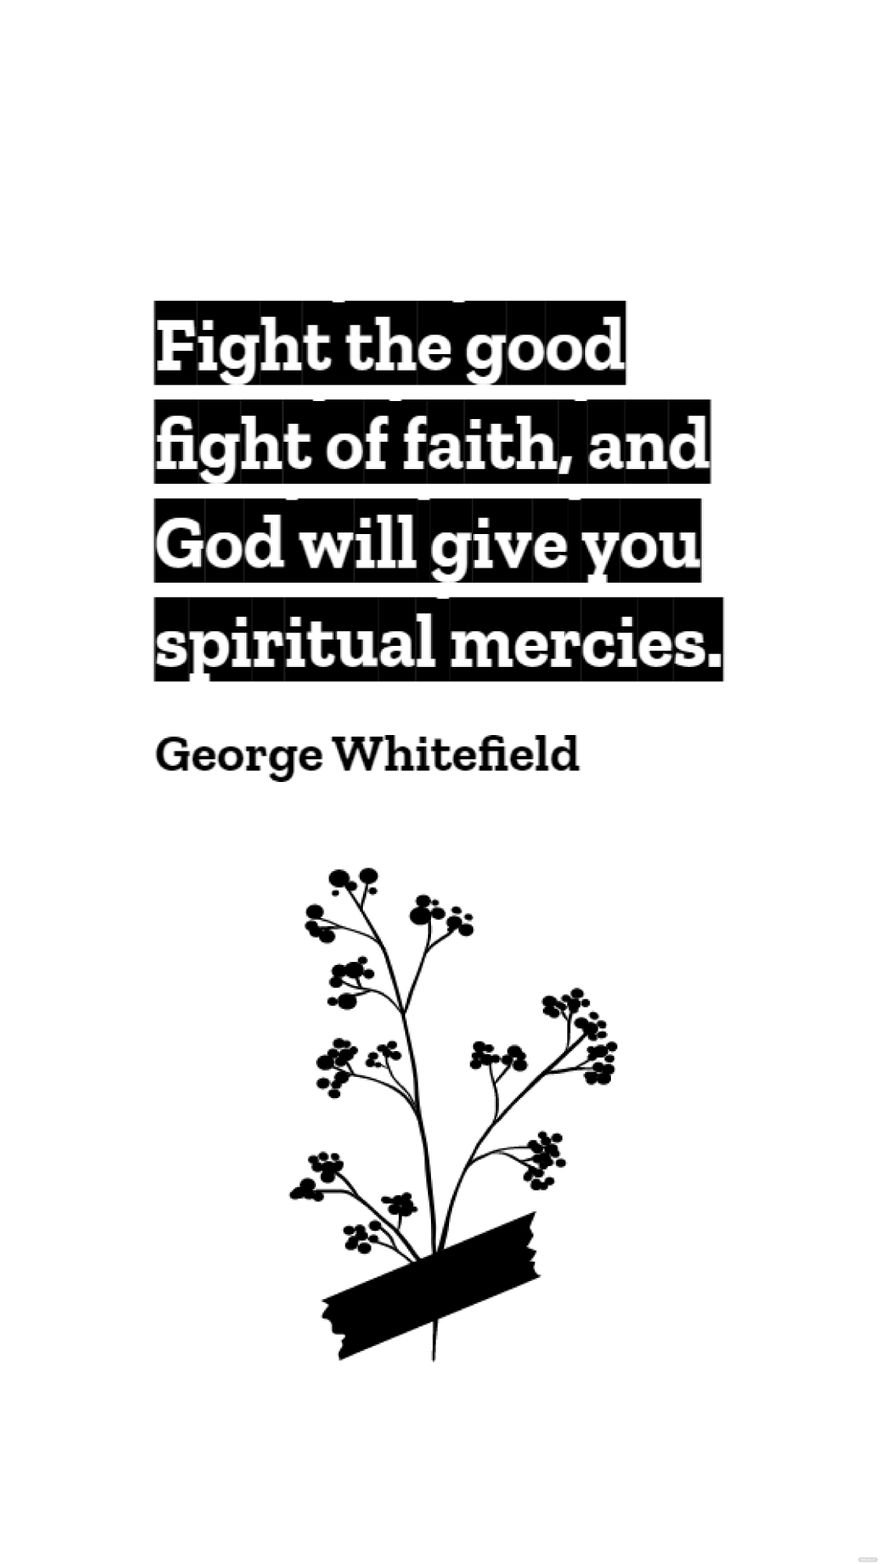 George Whitefield - Fight the good fight of faith, and God will give you spiritual mercies.